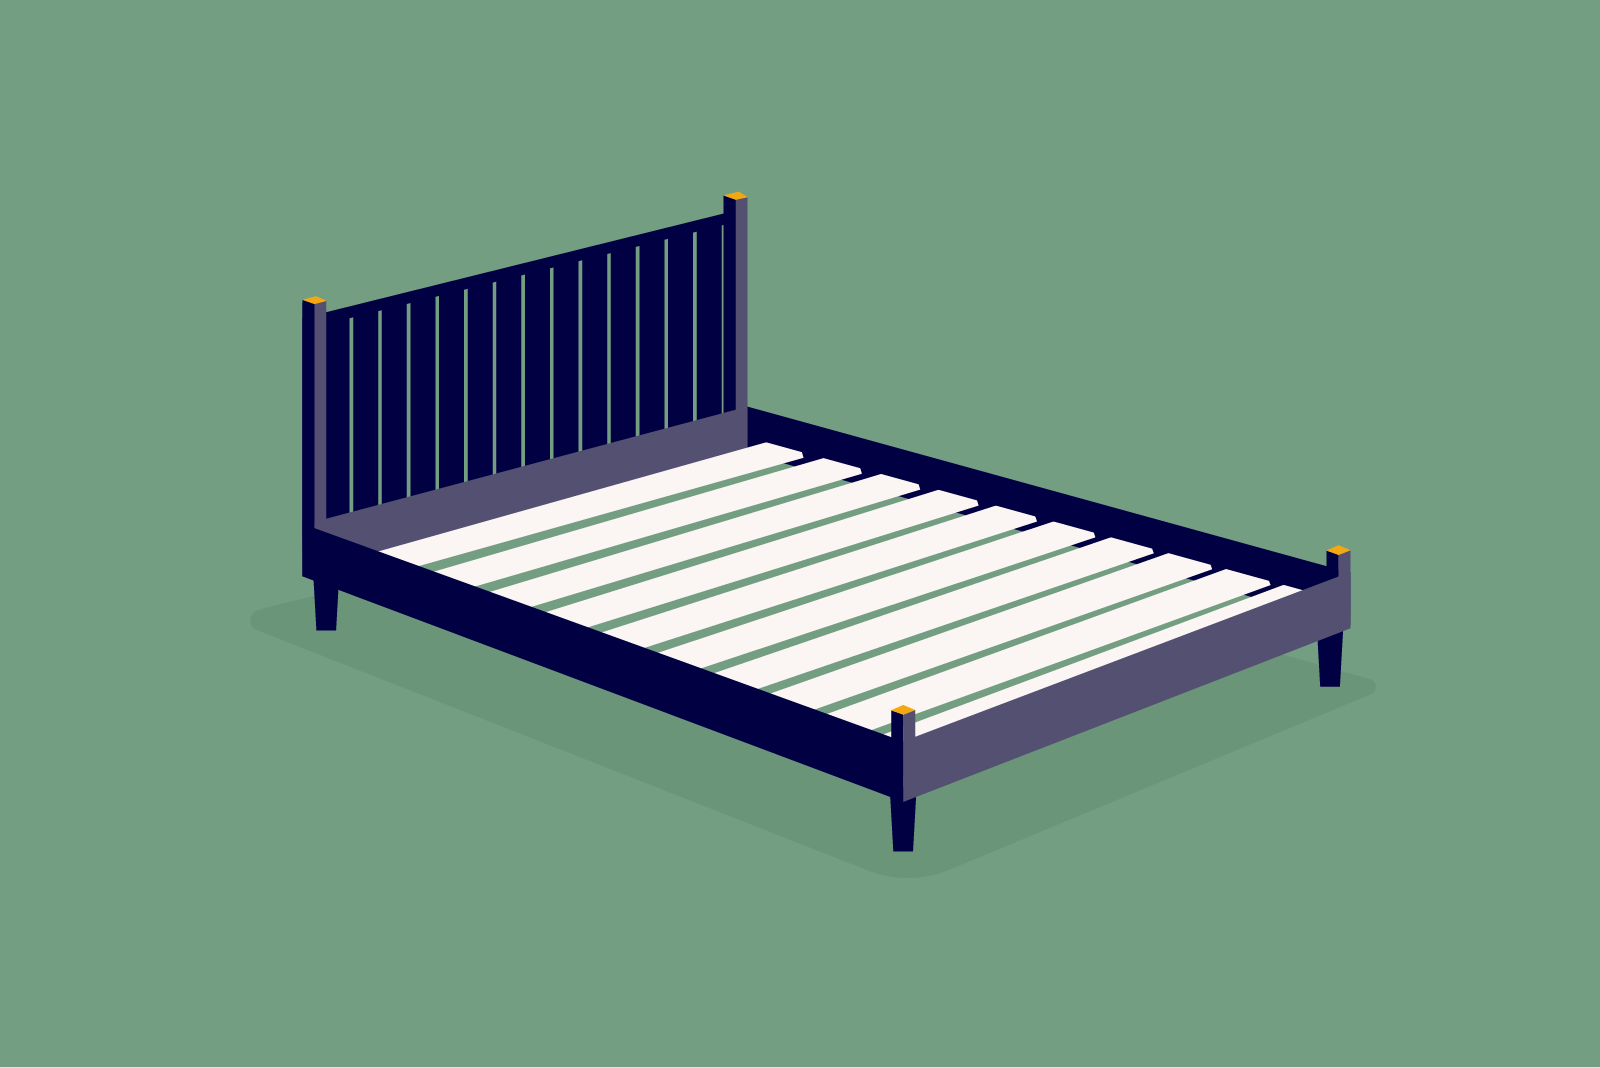 types of bed frames: illustration of a wooden bed frame on a green background